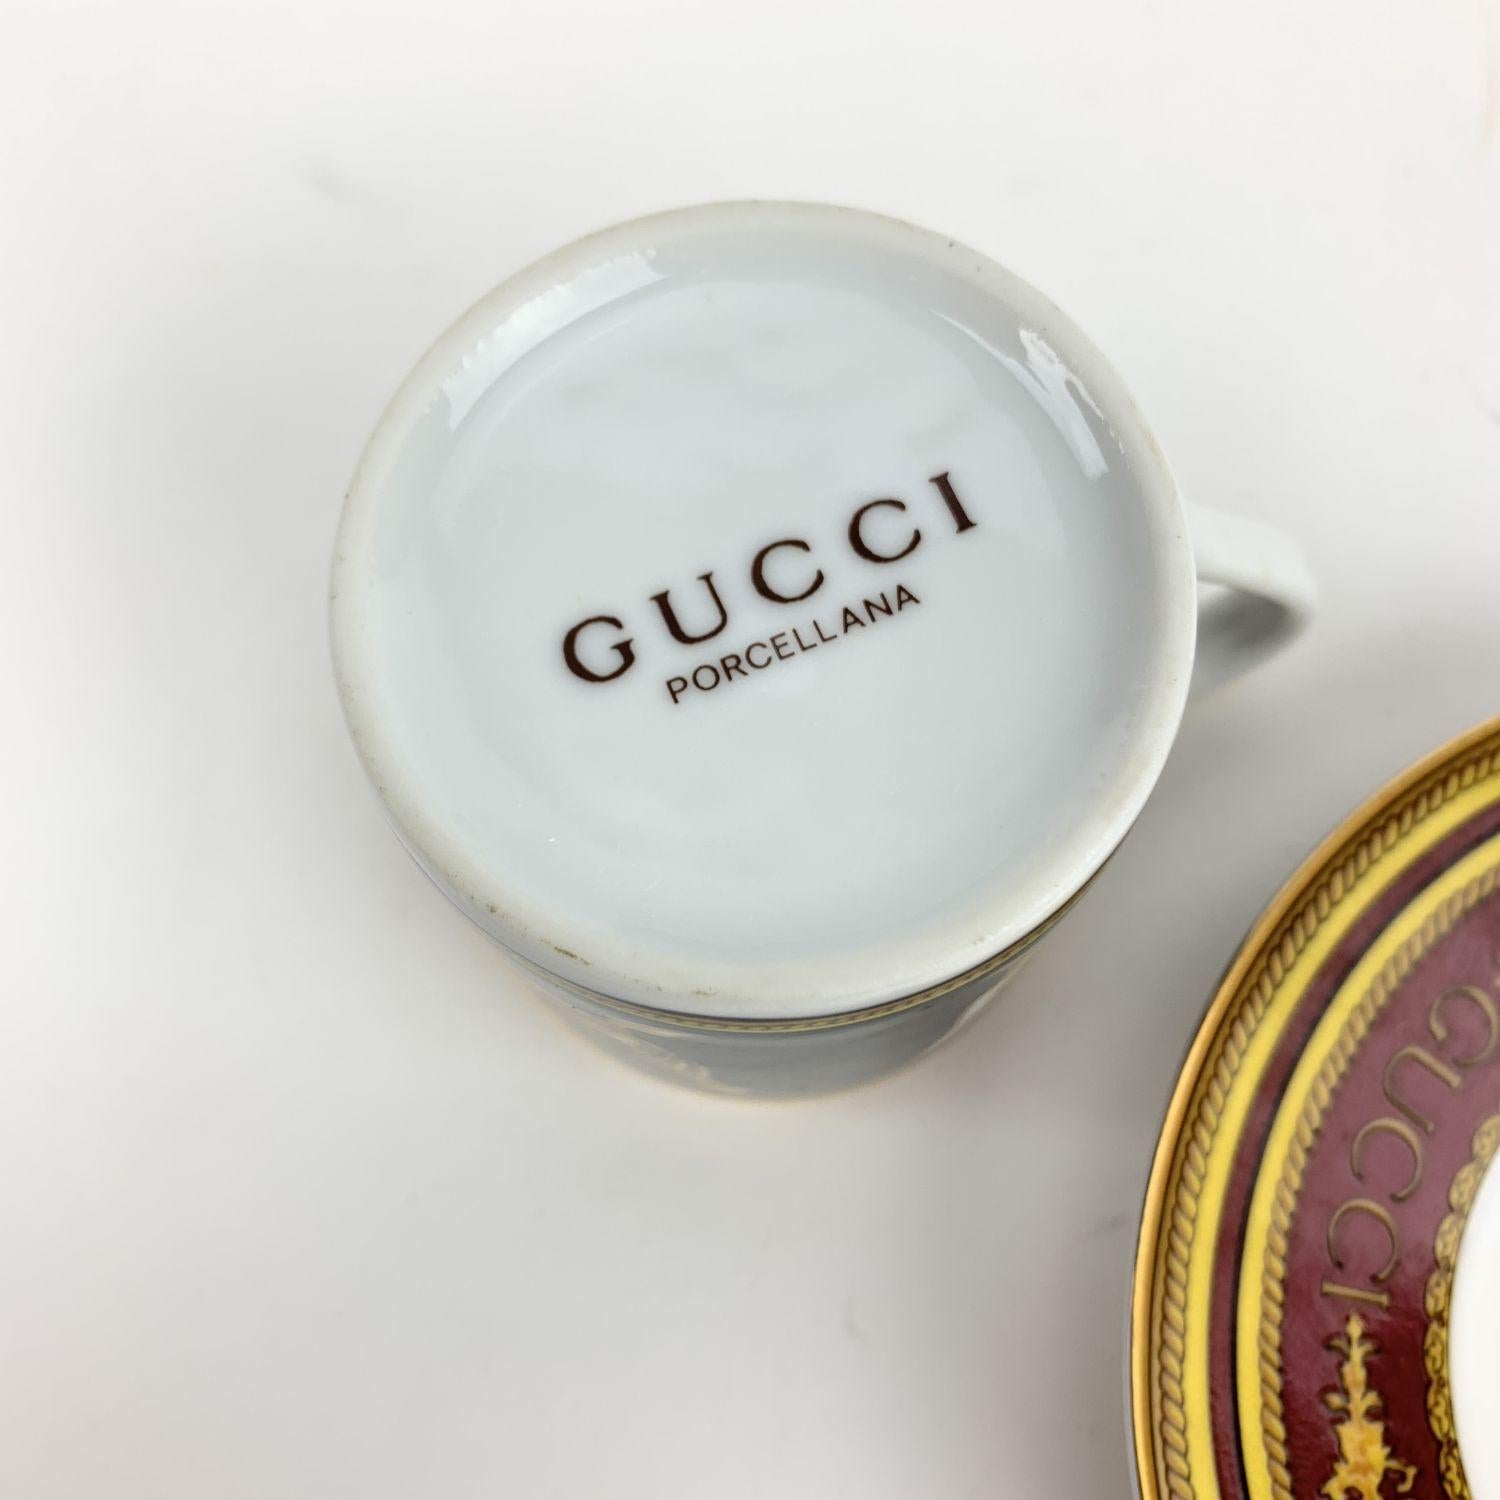  Gucci Vintage Porcelaine Chair Design Coffee Cup and Saucer Unisexe 